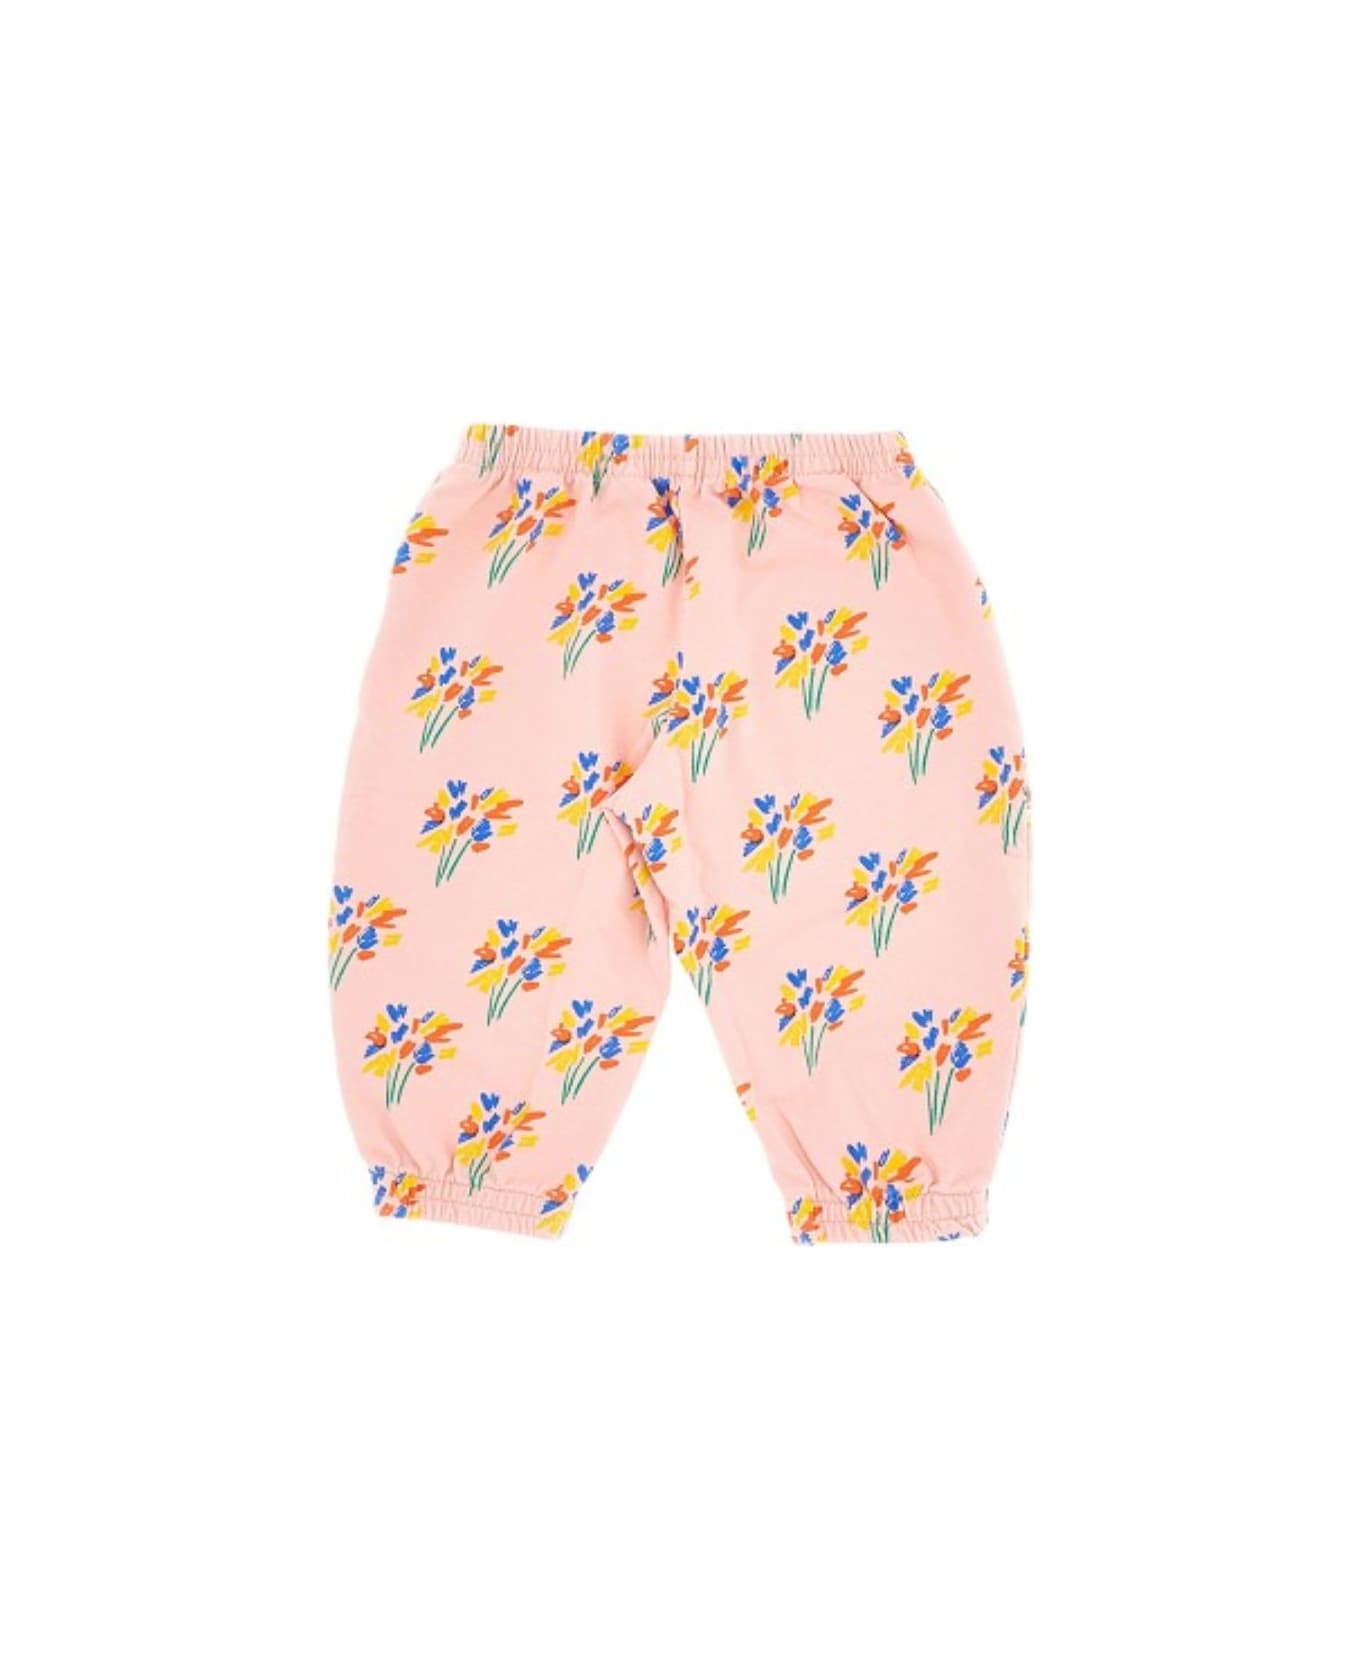 Bobo Choses Baby Fireworks All Over Jogging Pants - Pink ボトムス